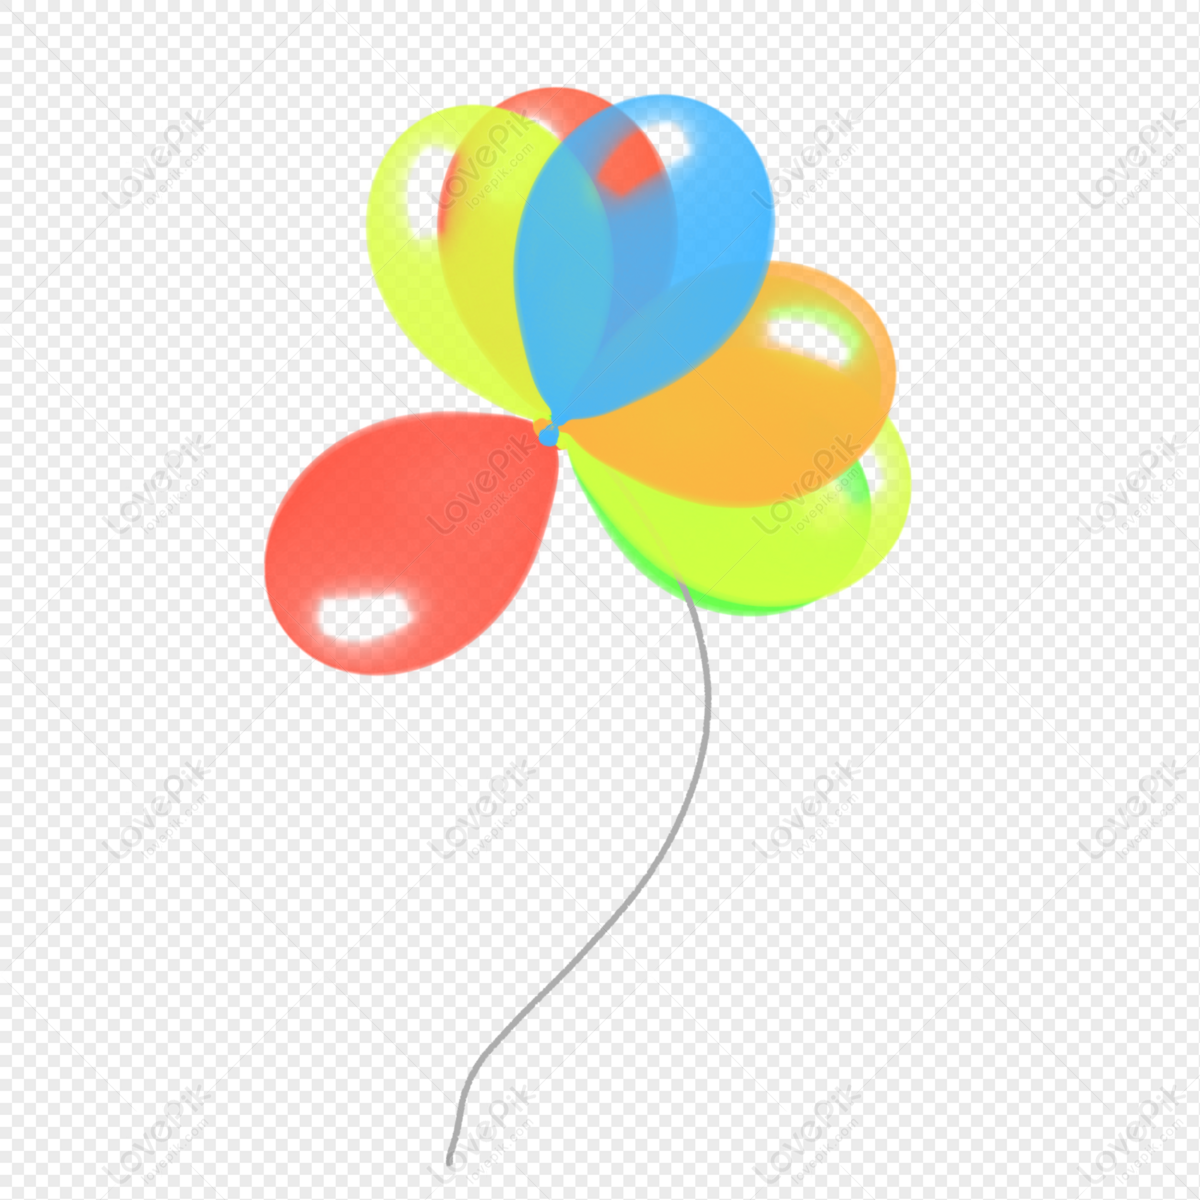 A String Of Balloons, Balloons Transparent, Balloons Colorful, Light Yellow  PNG White Transparent And Clipart Image For Free Download - Lovepik